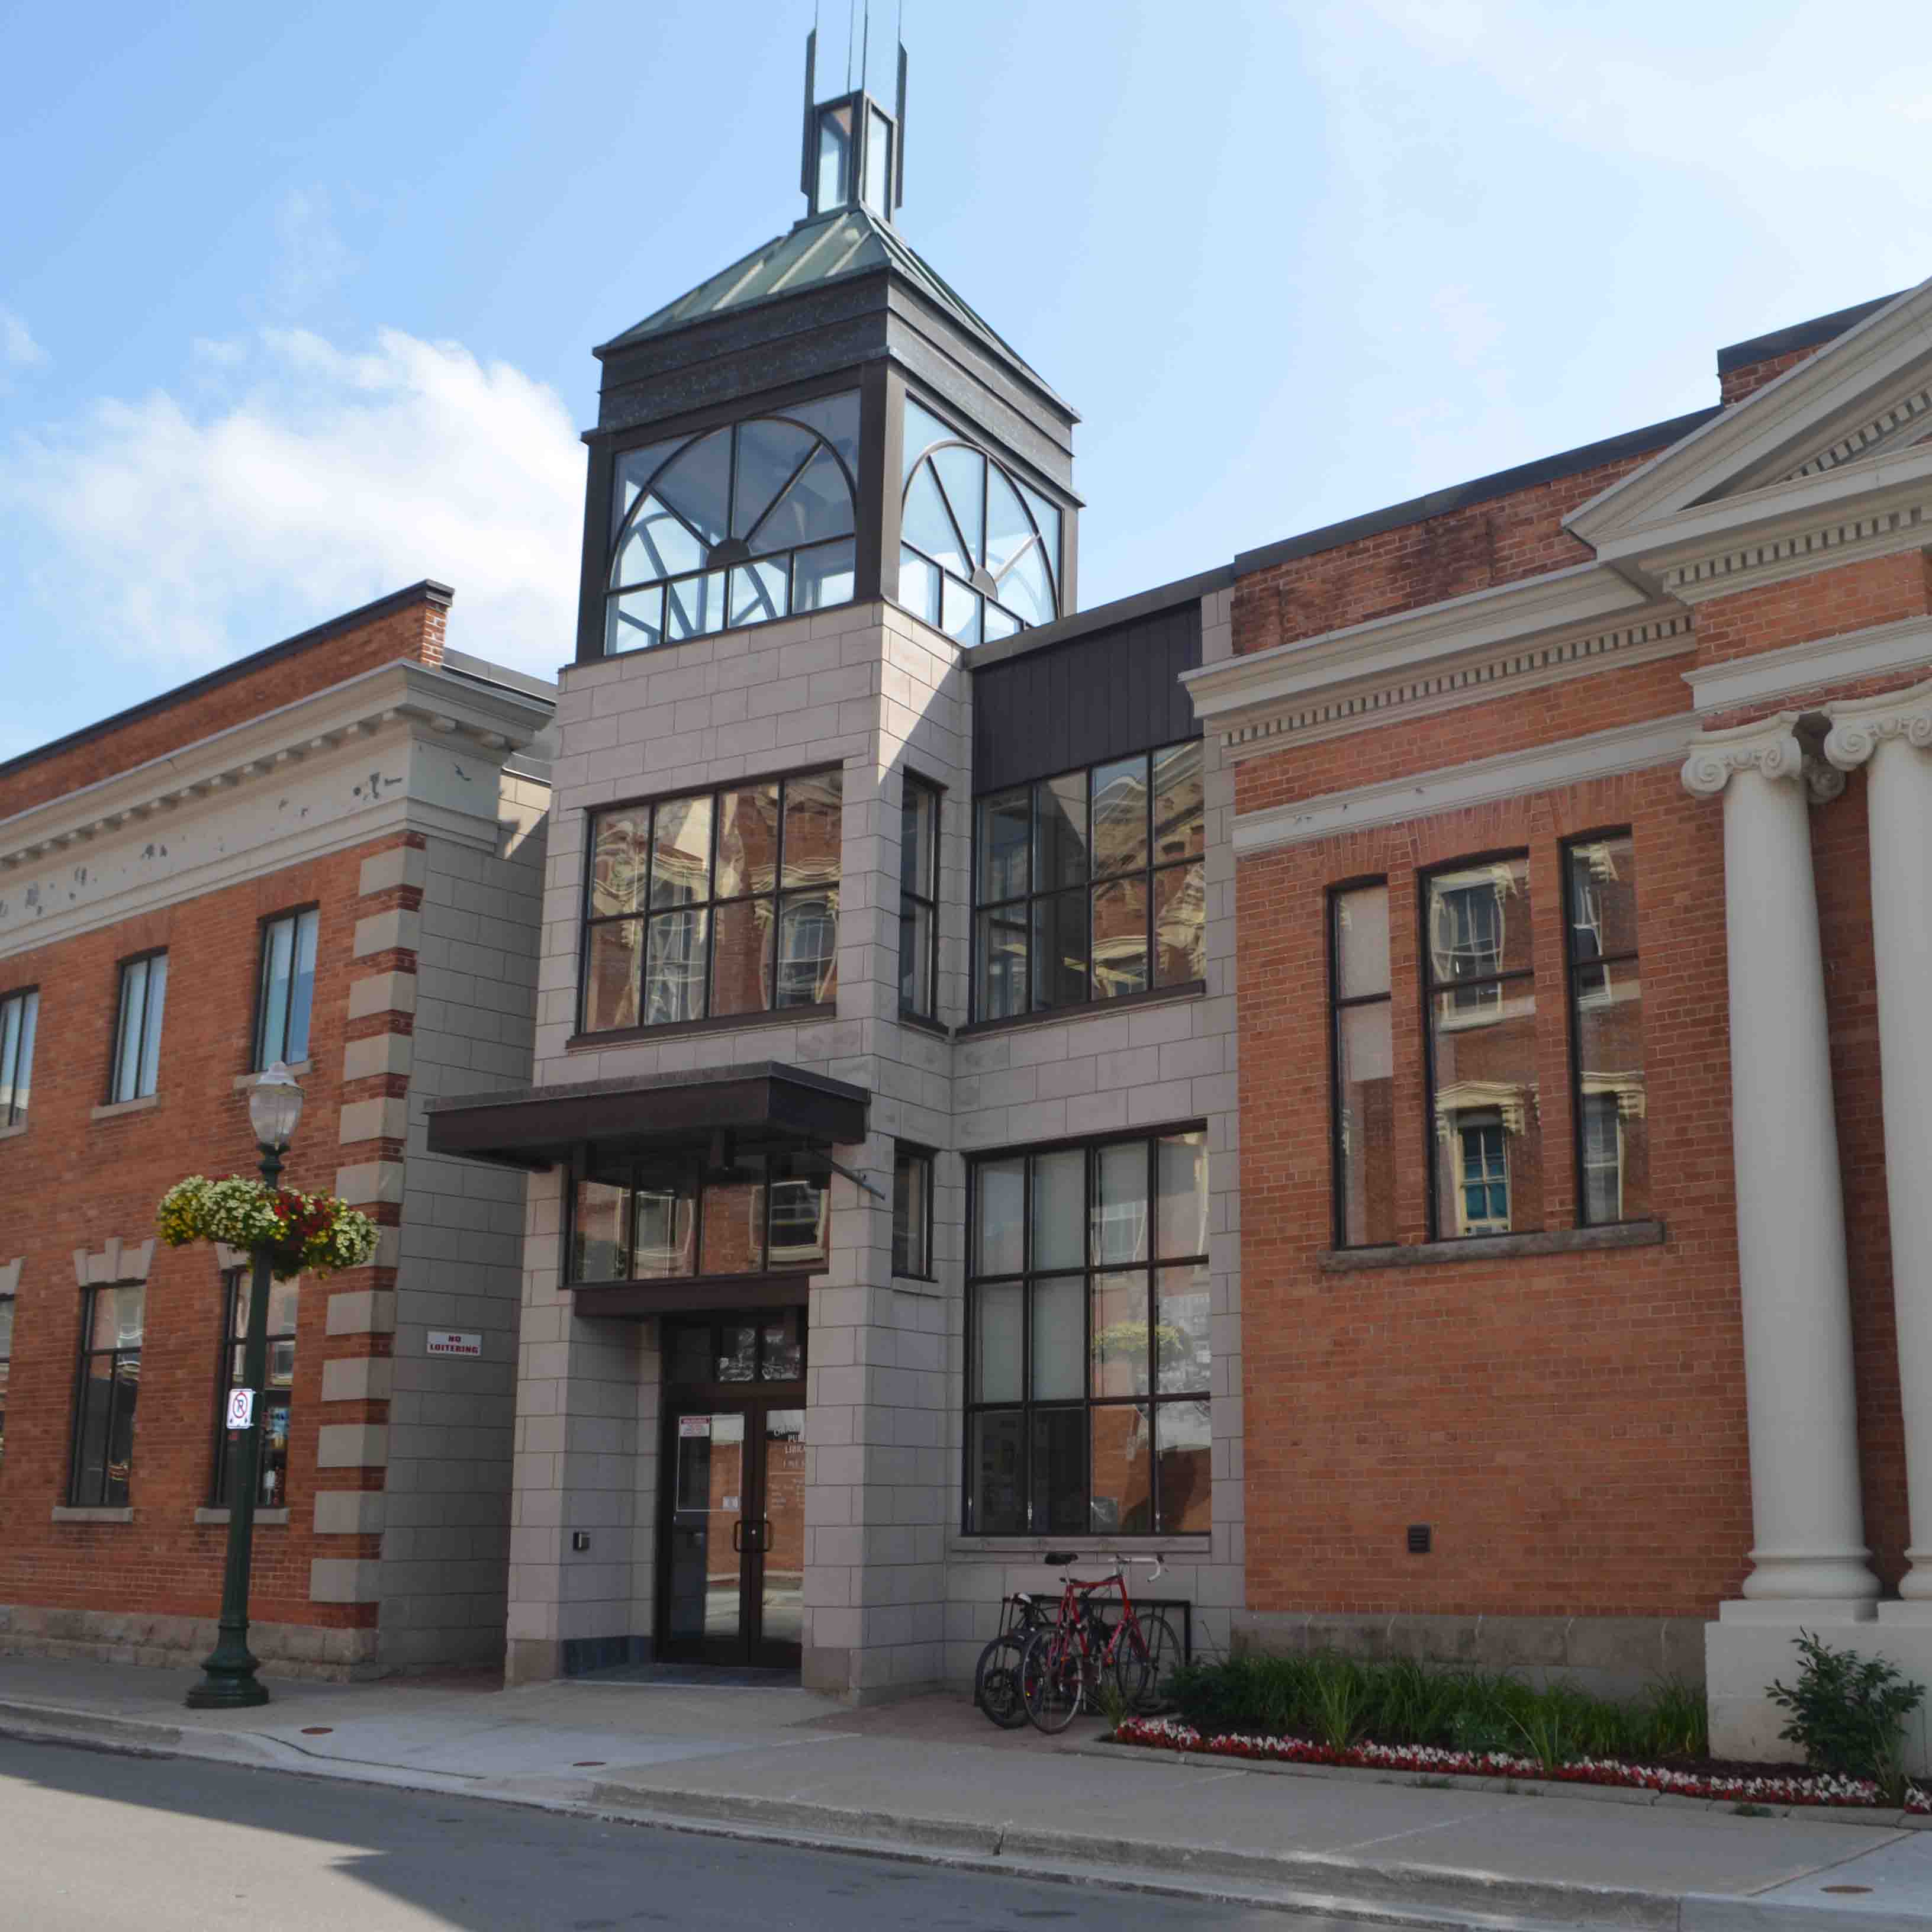 A large, historical building. The Orangeville Public Library Mill Street Branch's entrance off Mill Street in Orangeville.